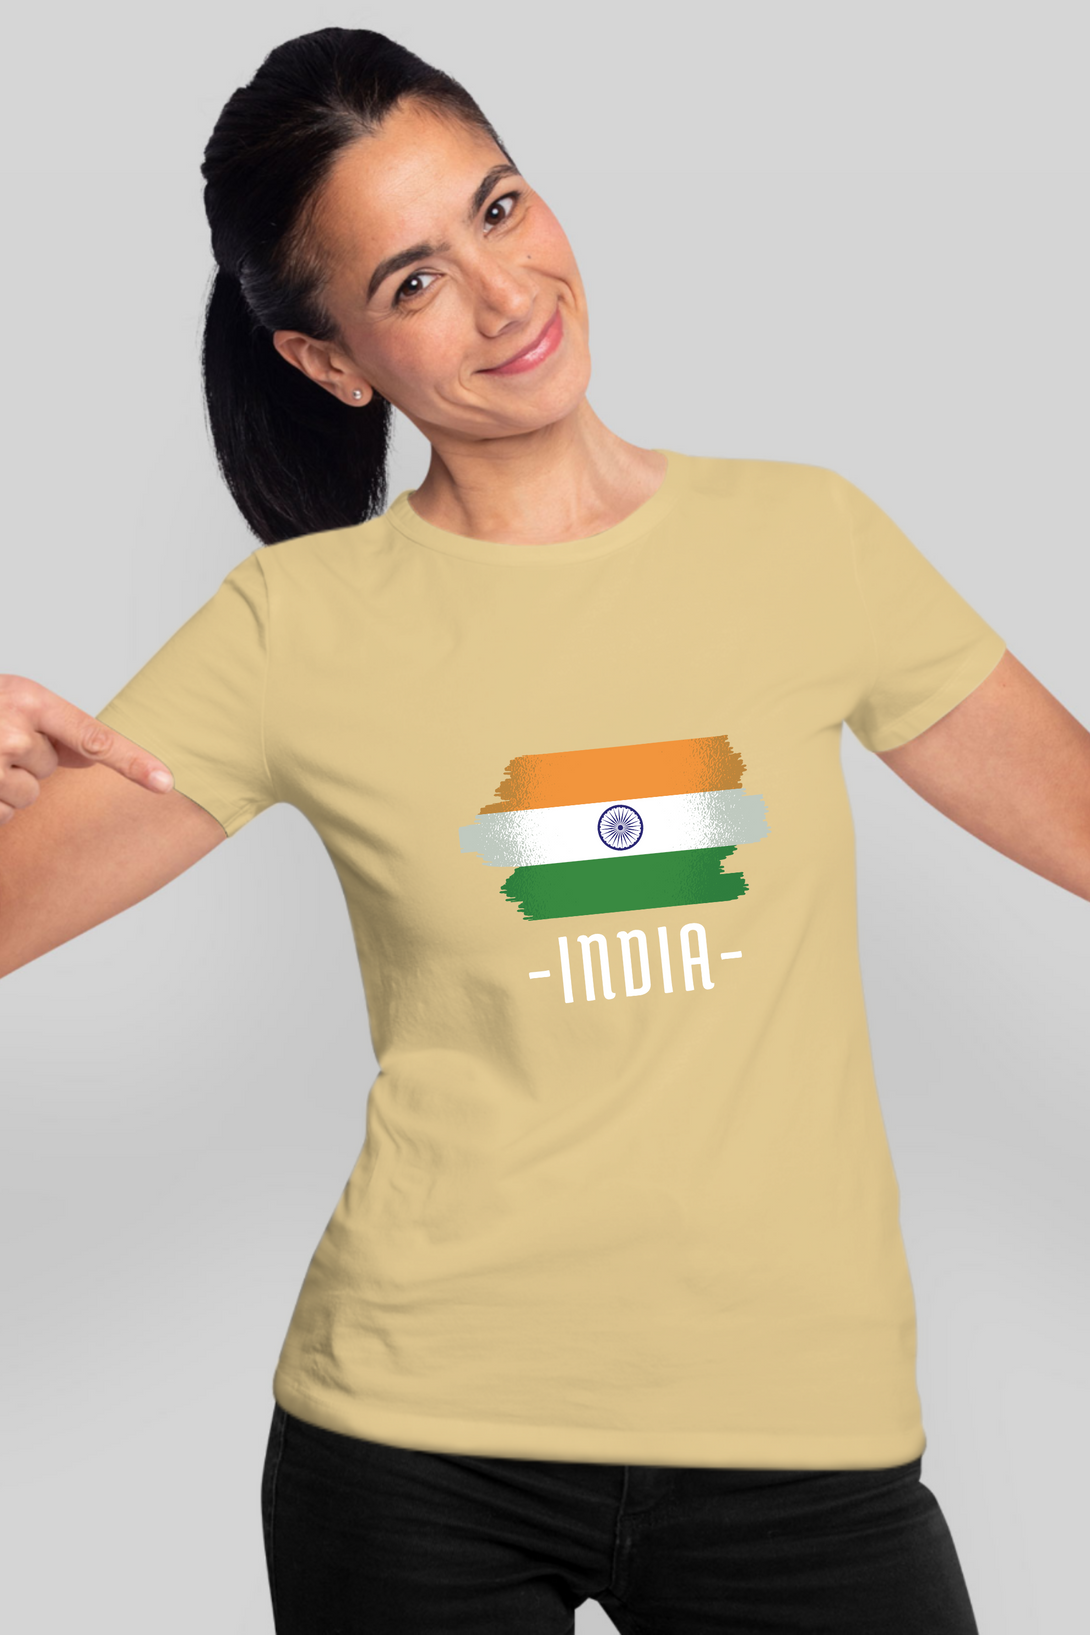 Proud Tricolor Printed T-Shirt For Women - WowWaves - 10